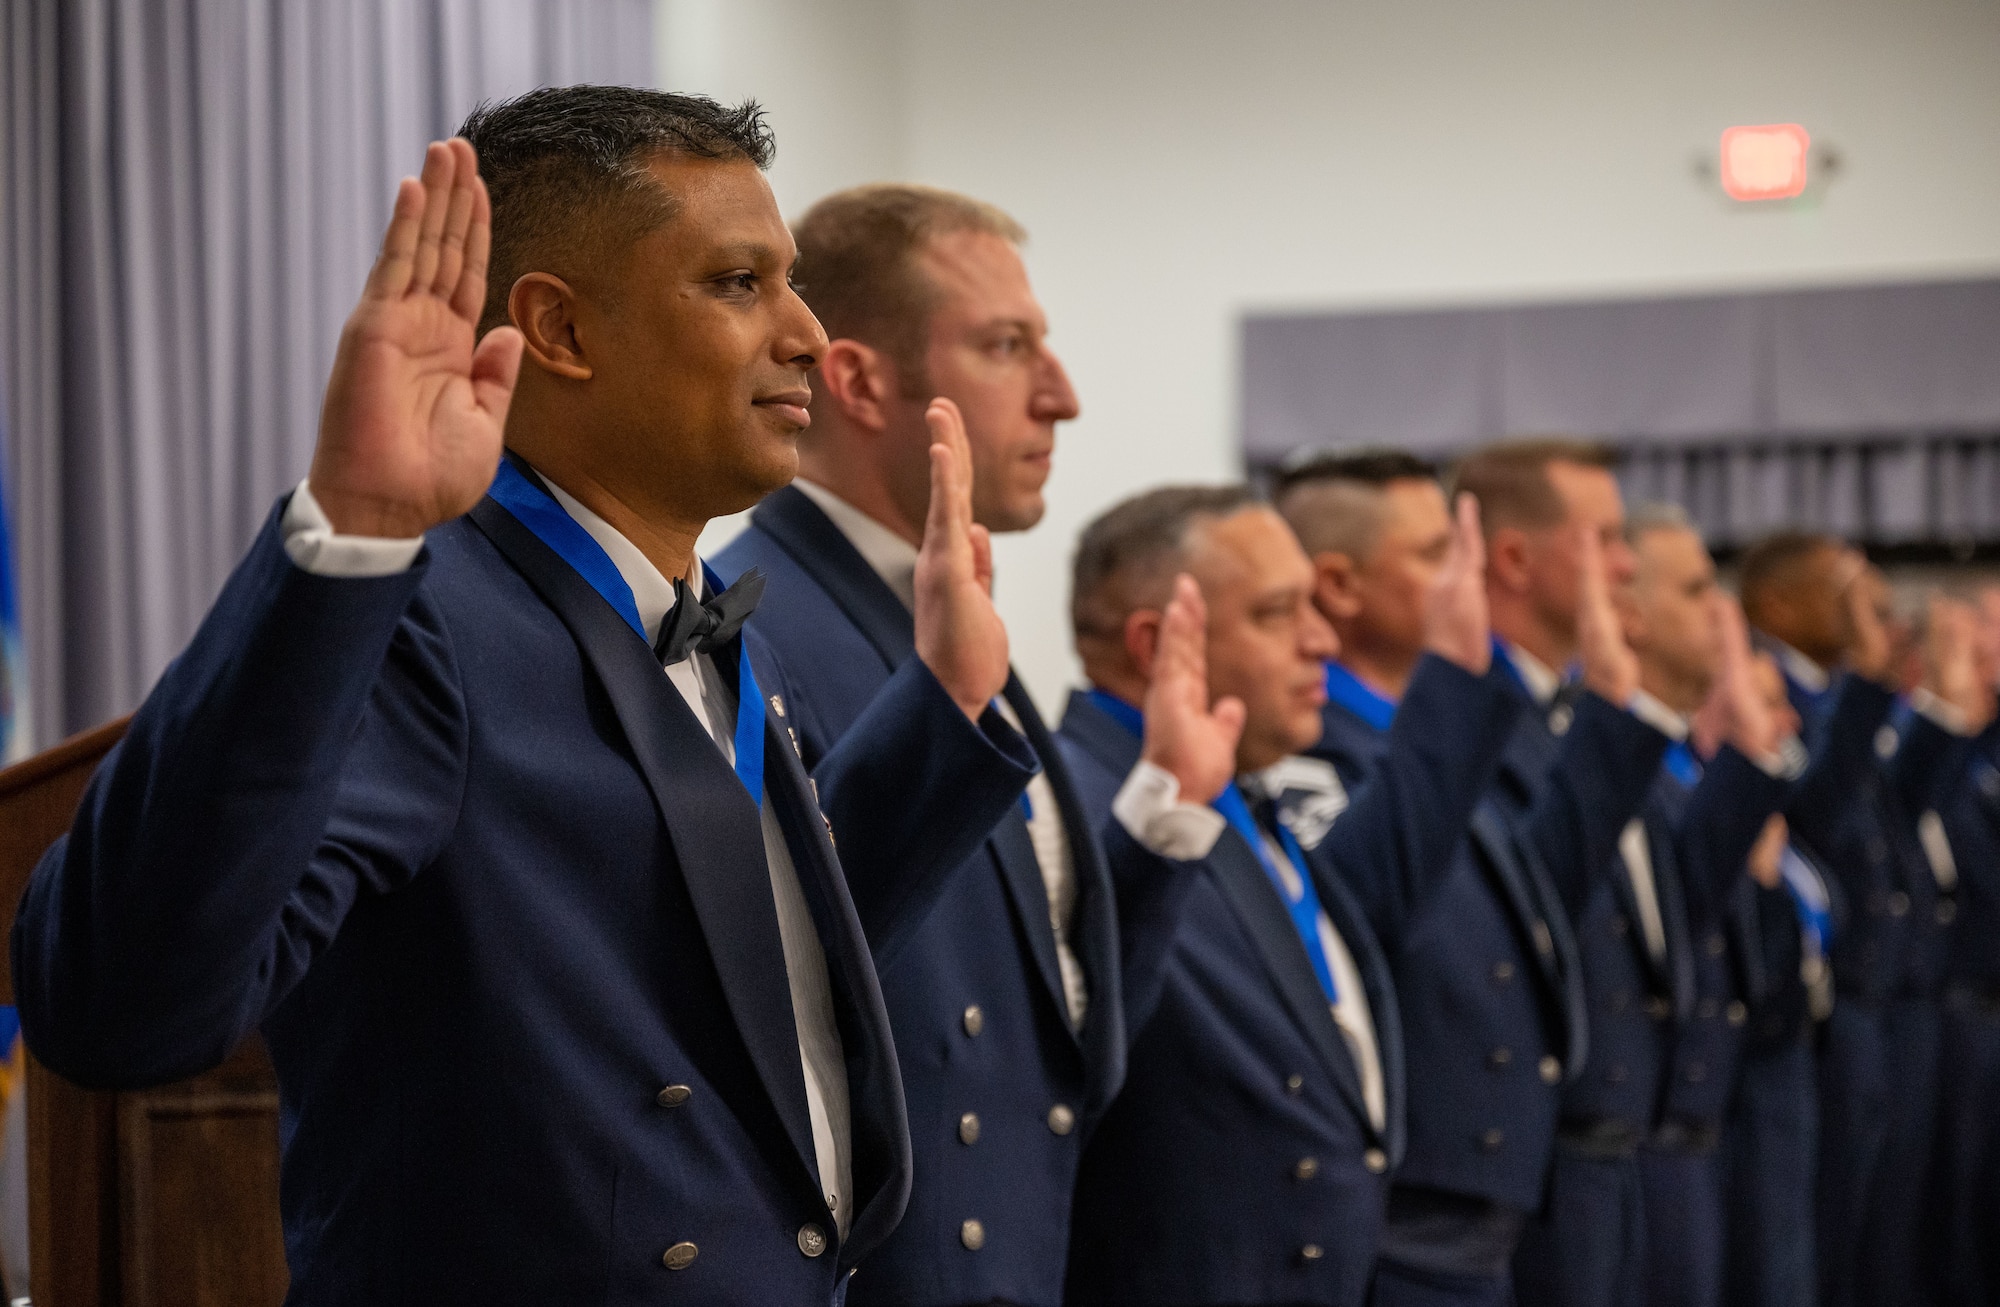 Chief Master Sgt. Troy Sahai, and other honorees, raise their hands during the Chief’s Charge at the 2022 Chief Induction ceremony at Dover Air Force Base, Delaware, April 2, 2022. The rank of chief master sergeant is the highest enlisted rank in the Air Force, with only one percent of the enlisted force structure reaching it. (U.S. Air Force photo by Airman 1st Class Cydney Lee)